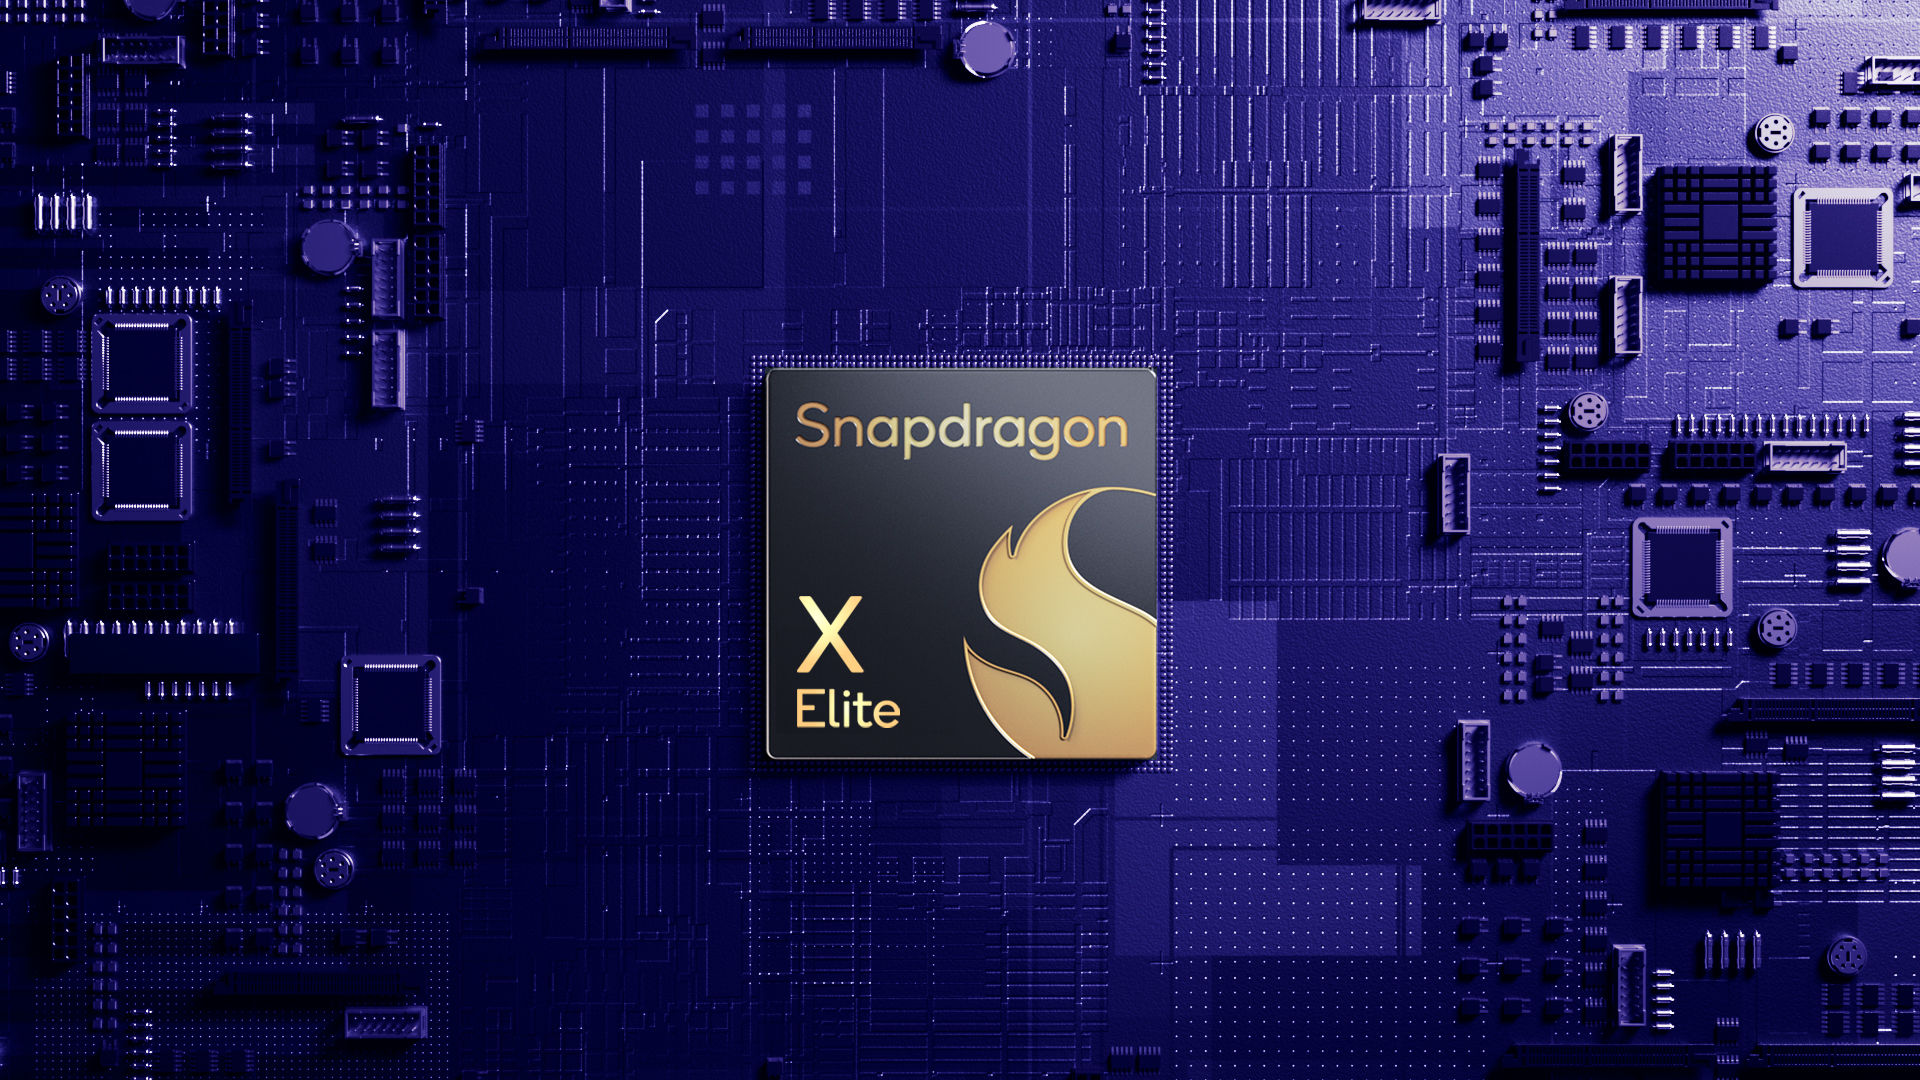 The Snapdragon X Plus offers similar AI and 5G capabilities as the Elite version but with a less powerful CPU and GPU